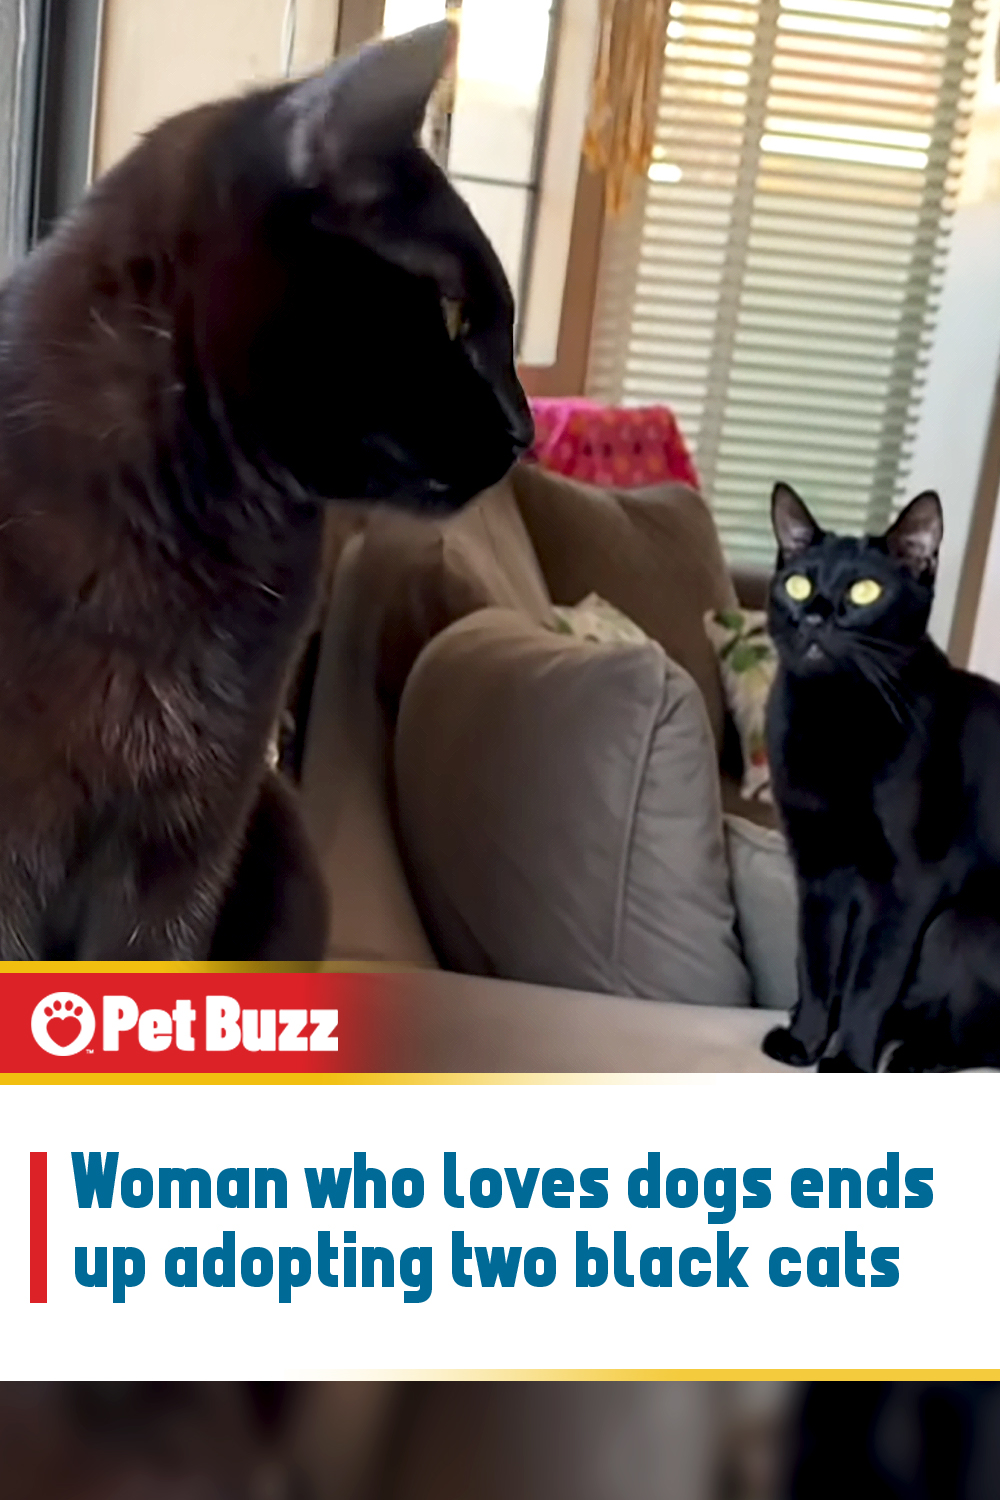 Woman who loves dogs ends up adopting two black cats.